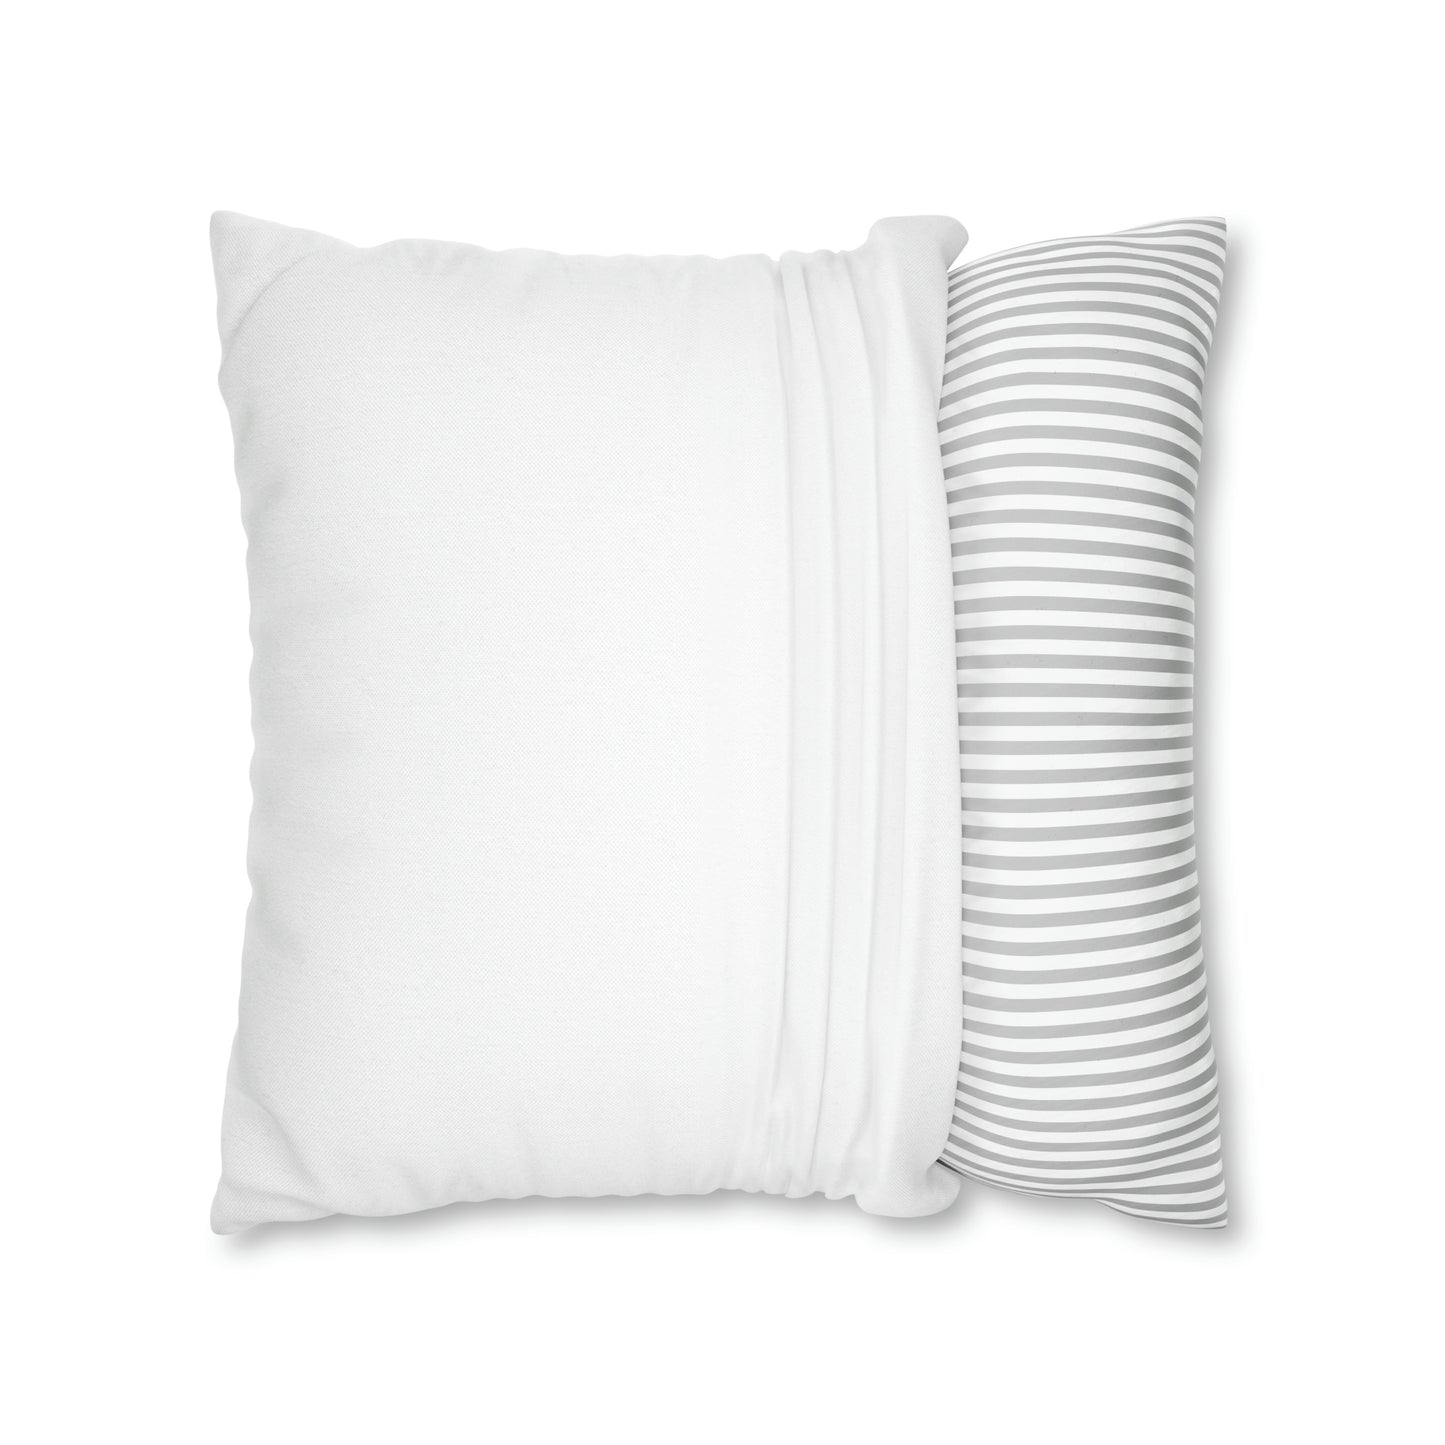 White Riding the wave Polyester Square Pillow | Spun Polyester Square Pillow Case | Surfboard | flower Décor pillow